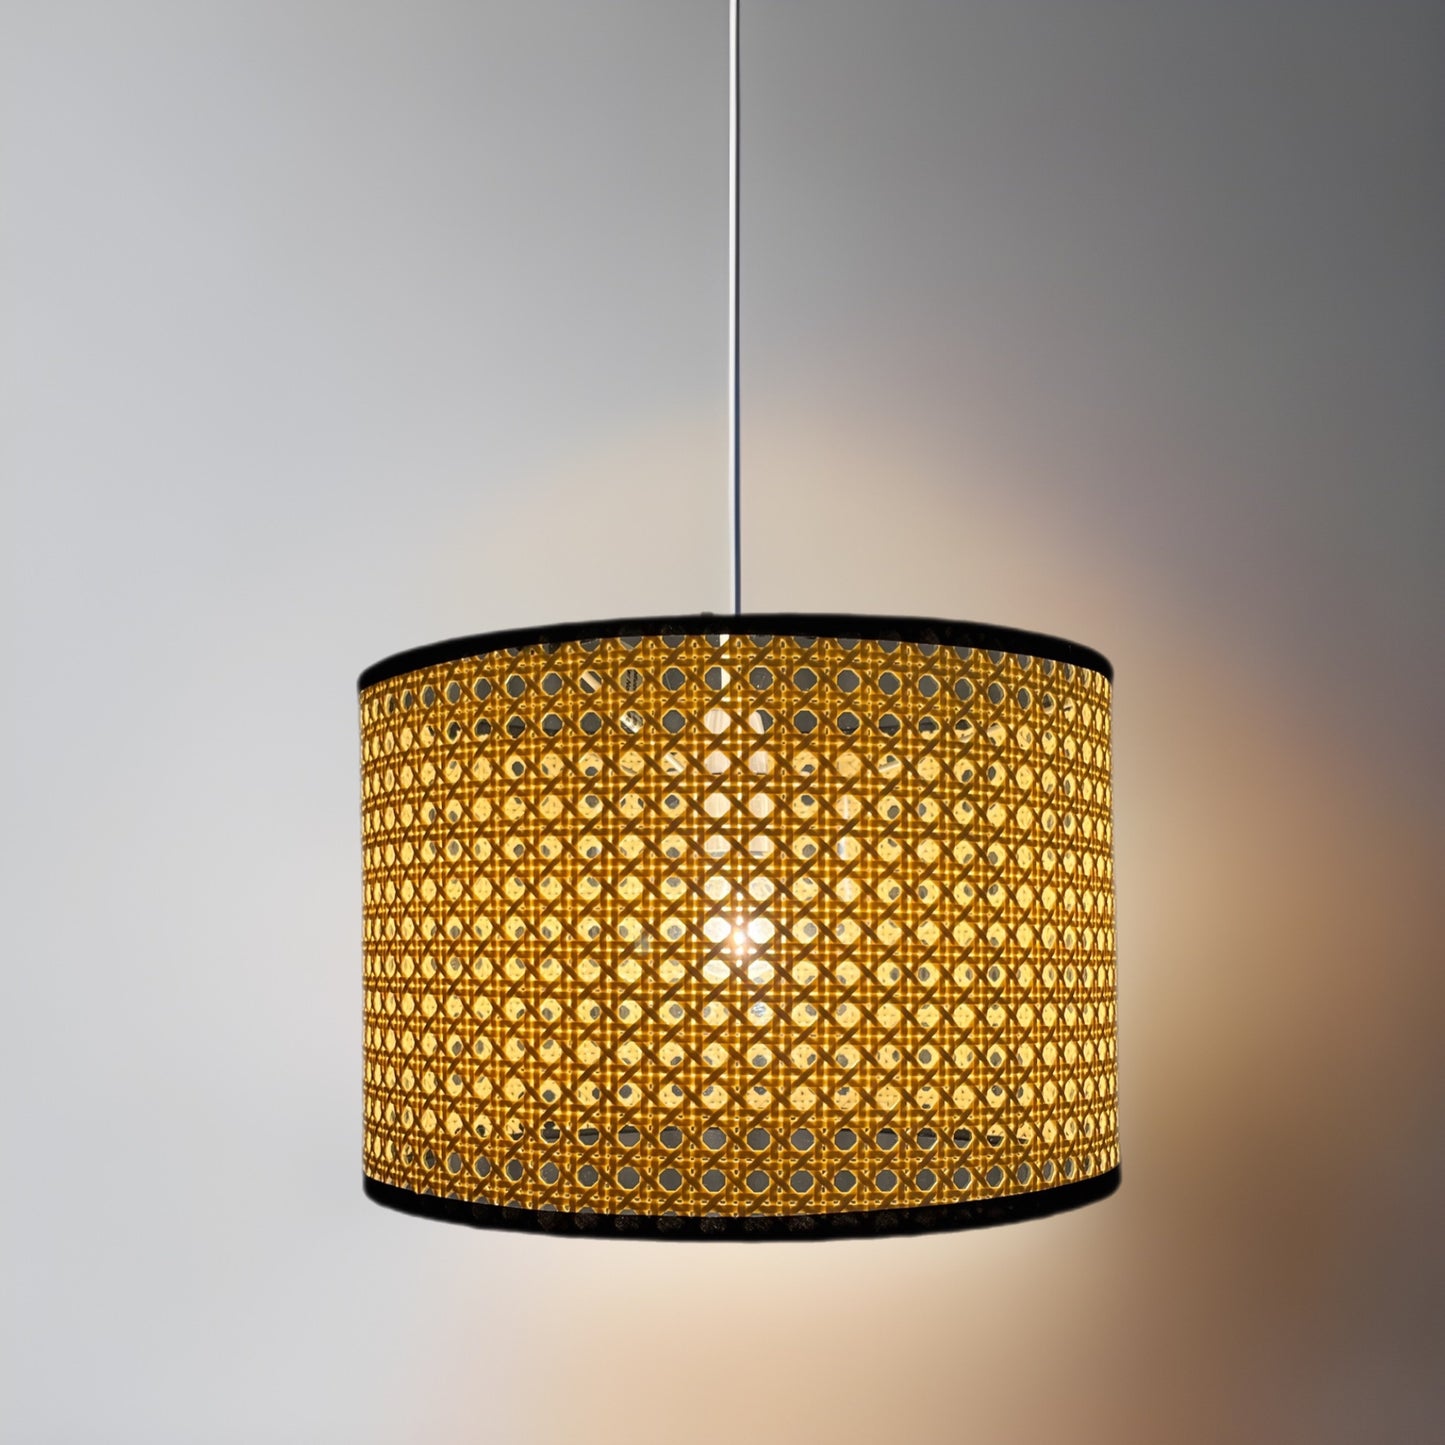 Traditional and sleek drum shaped easy fit pendant light shade with woven rattan frame. Simply attaches to your existing pendant wire cable. Finished in a unique light brown material in a woven style and complete with a black cotton trim giving this product a very natural and minimalist finish. This fantastic shade can double up as either a ceiling pendant light shade or table lampshade. 